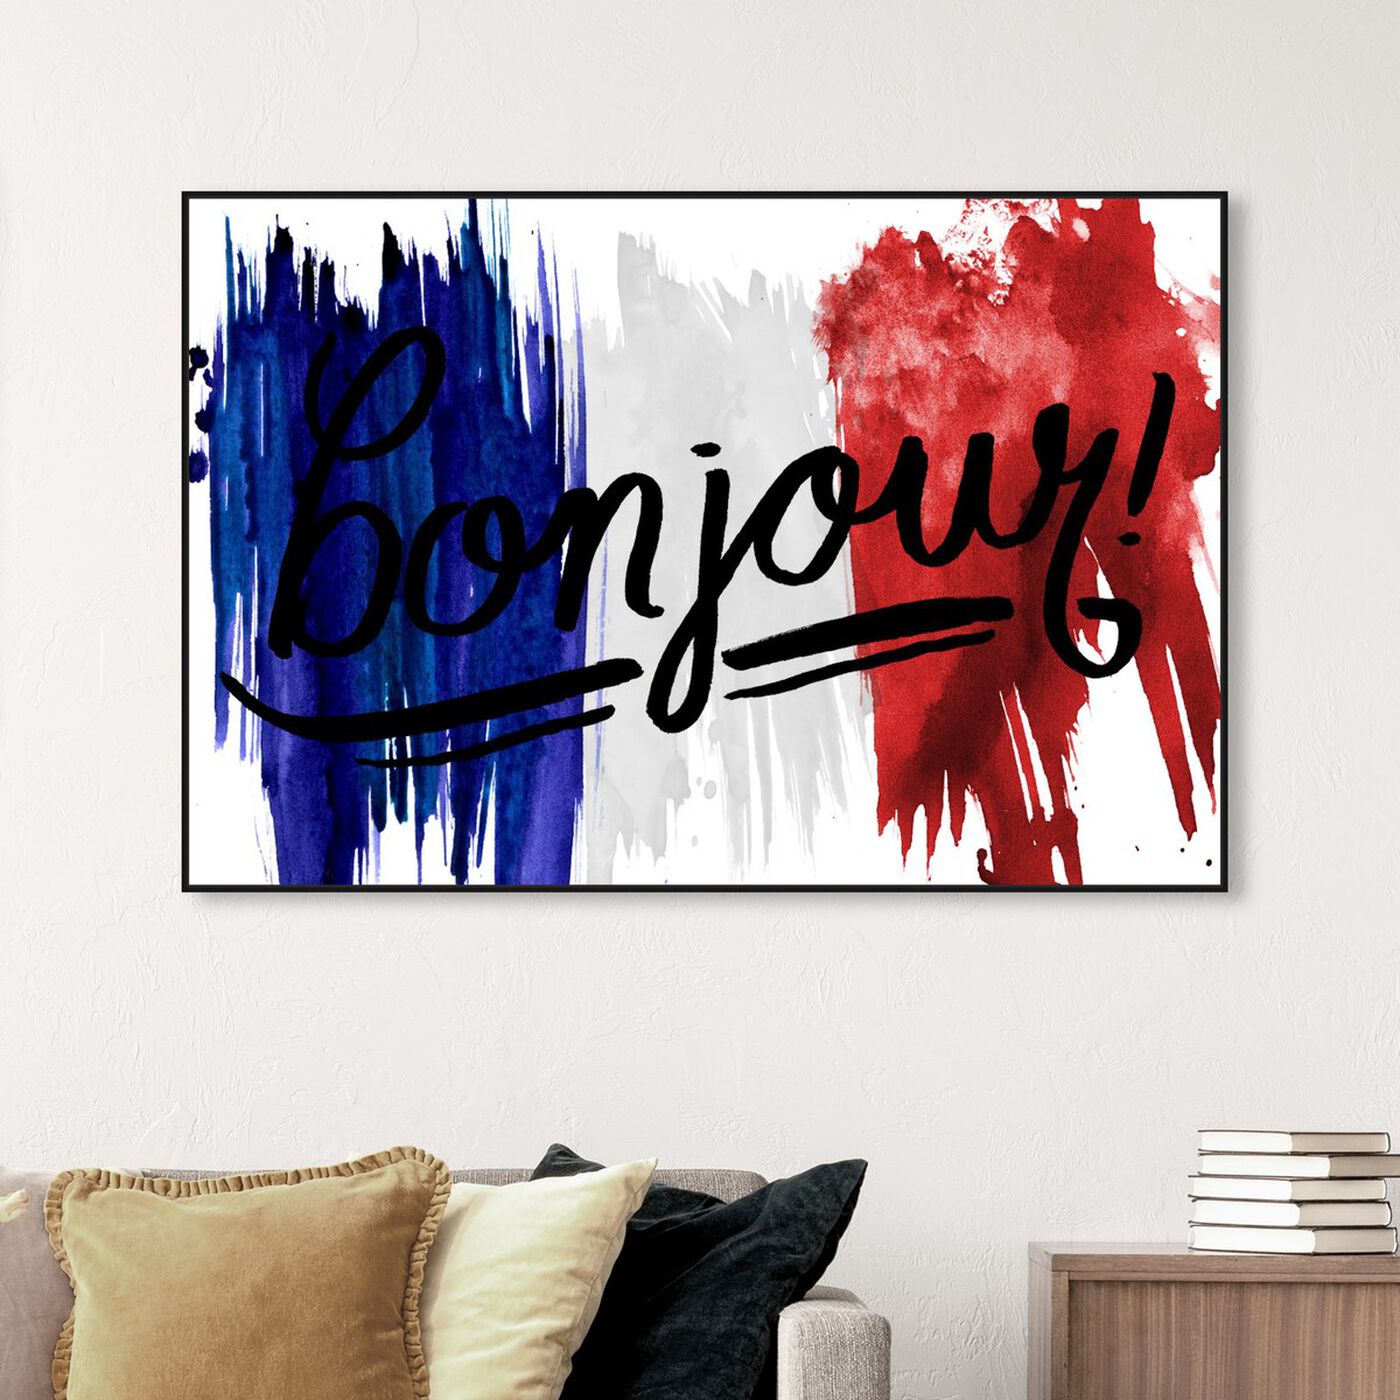 Hanging view of Bonjour Paris featuring typography and quotes and travel quotes and sayings art.